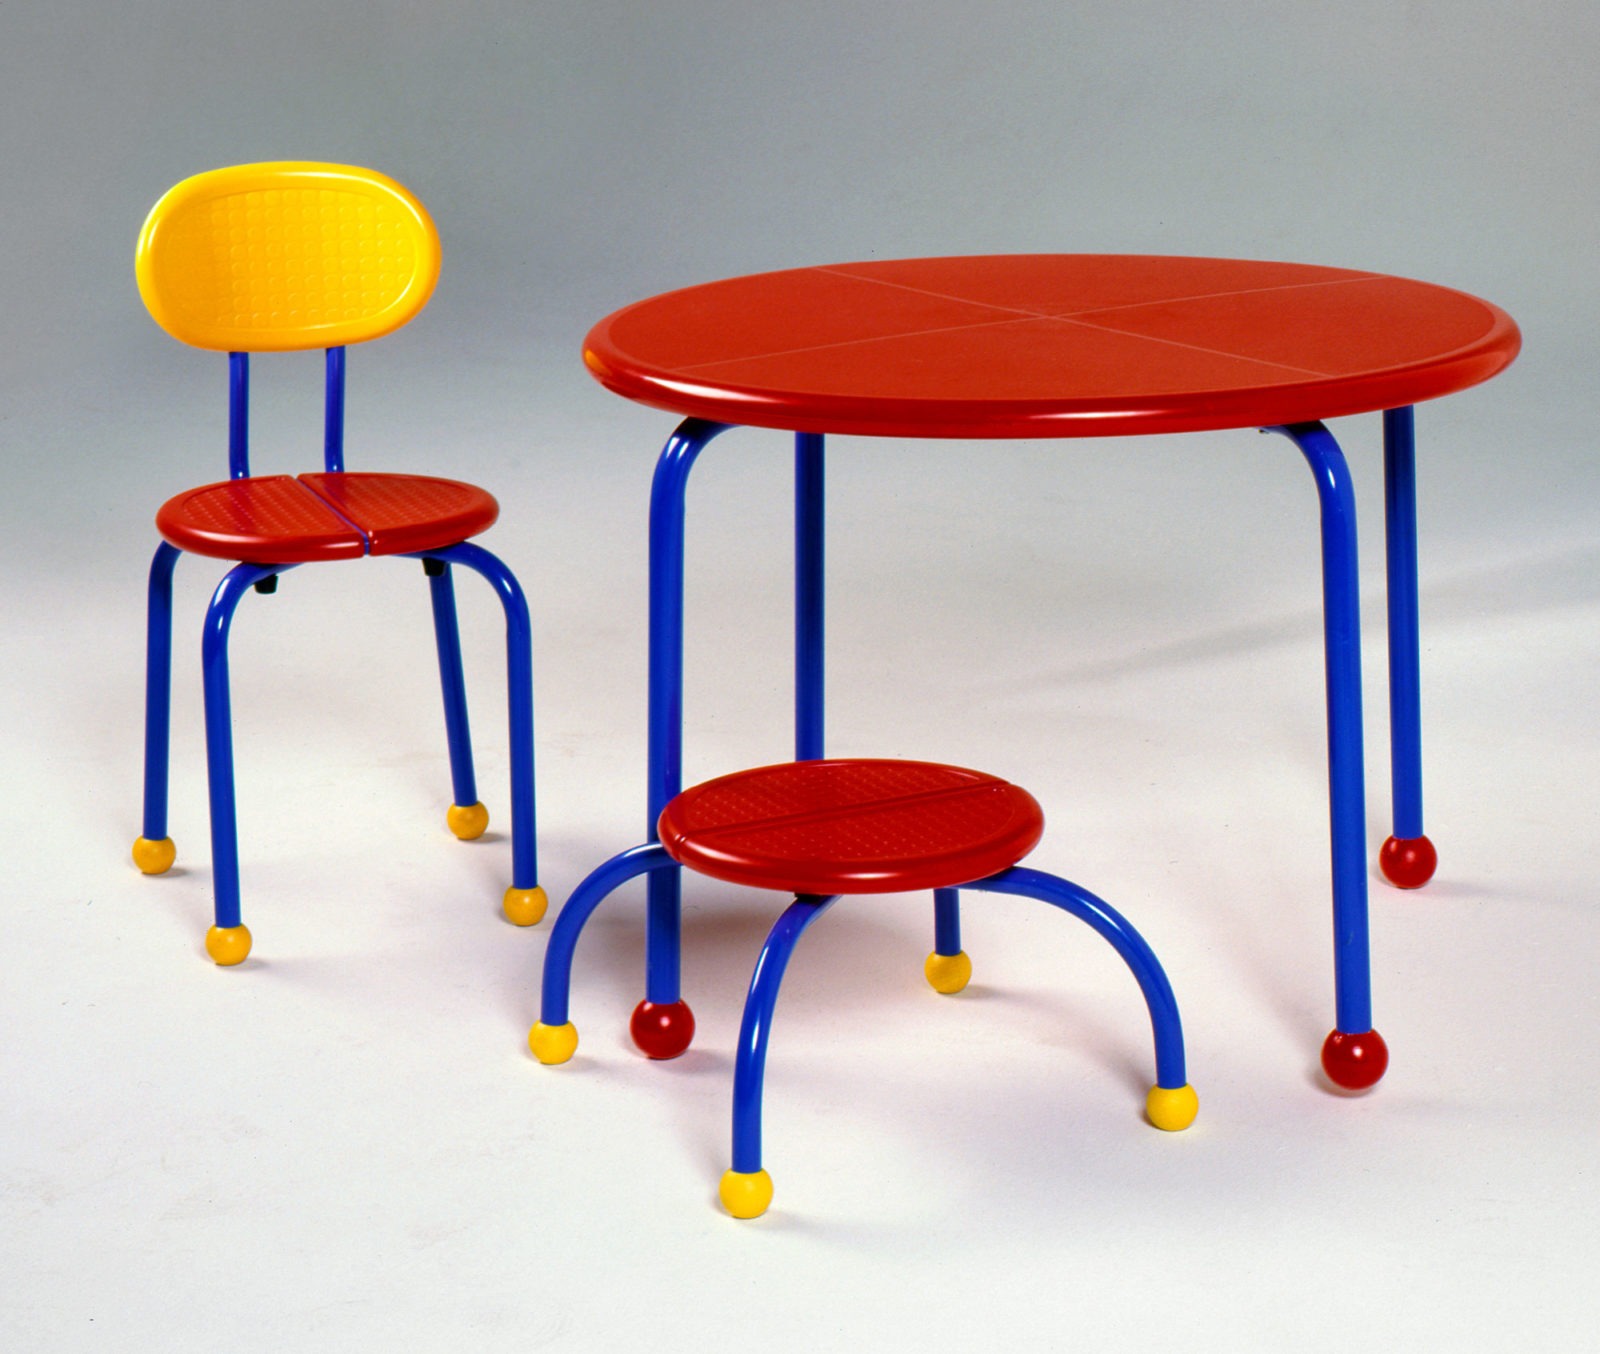 Brightly coloured children's furniture in red, yellow and blue – a table, chair and low stool, PUZZEL.